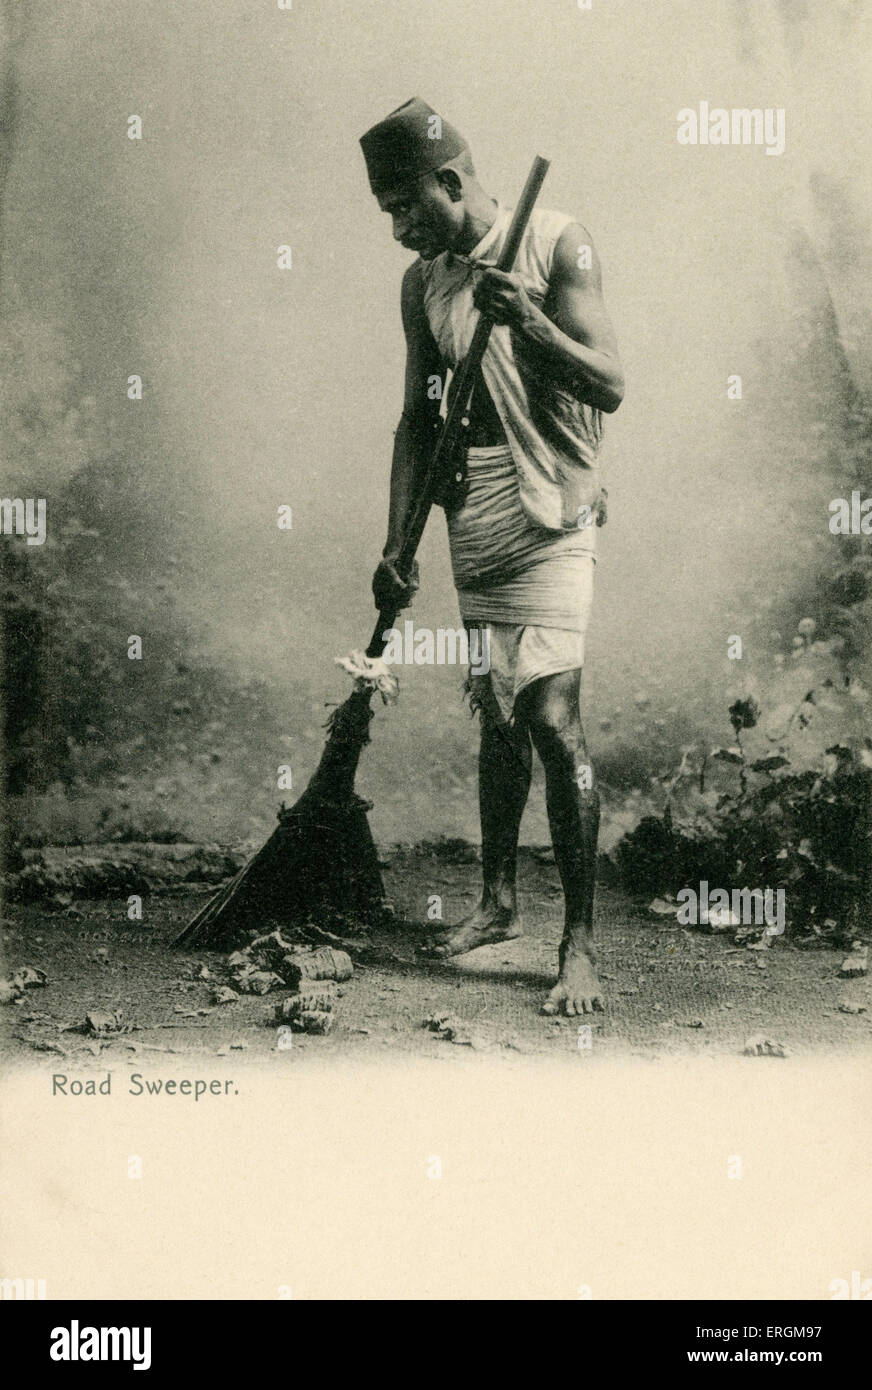 An Indian road sweeper. Photograph from early 20th century. Stock Photo